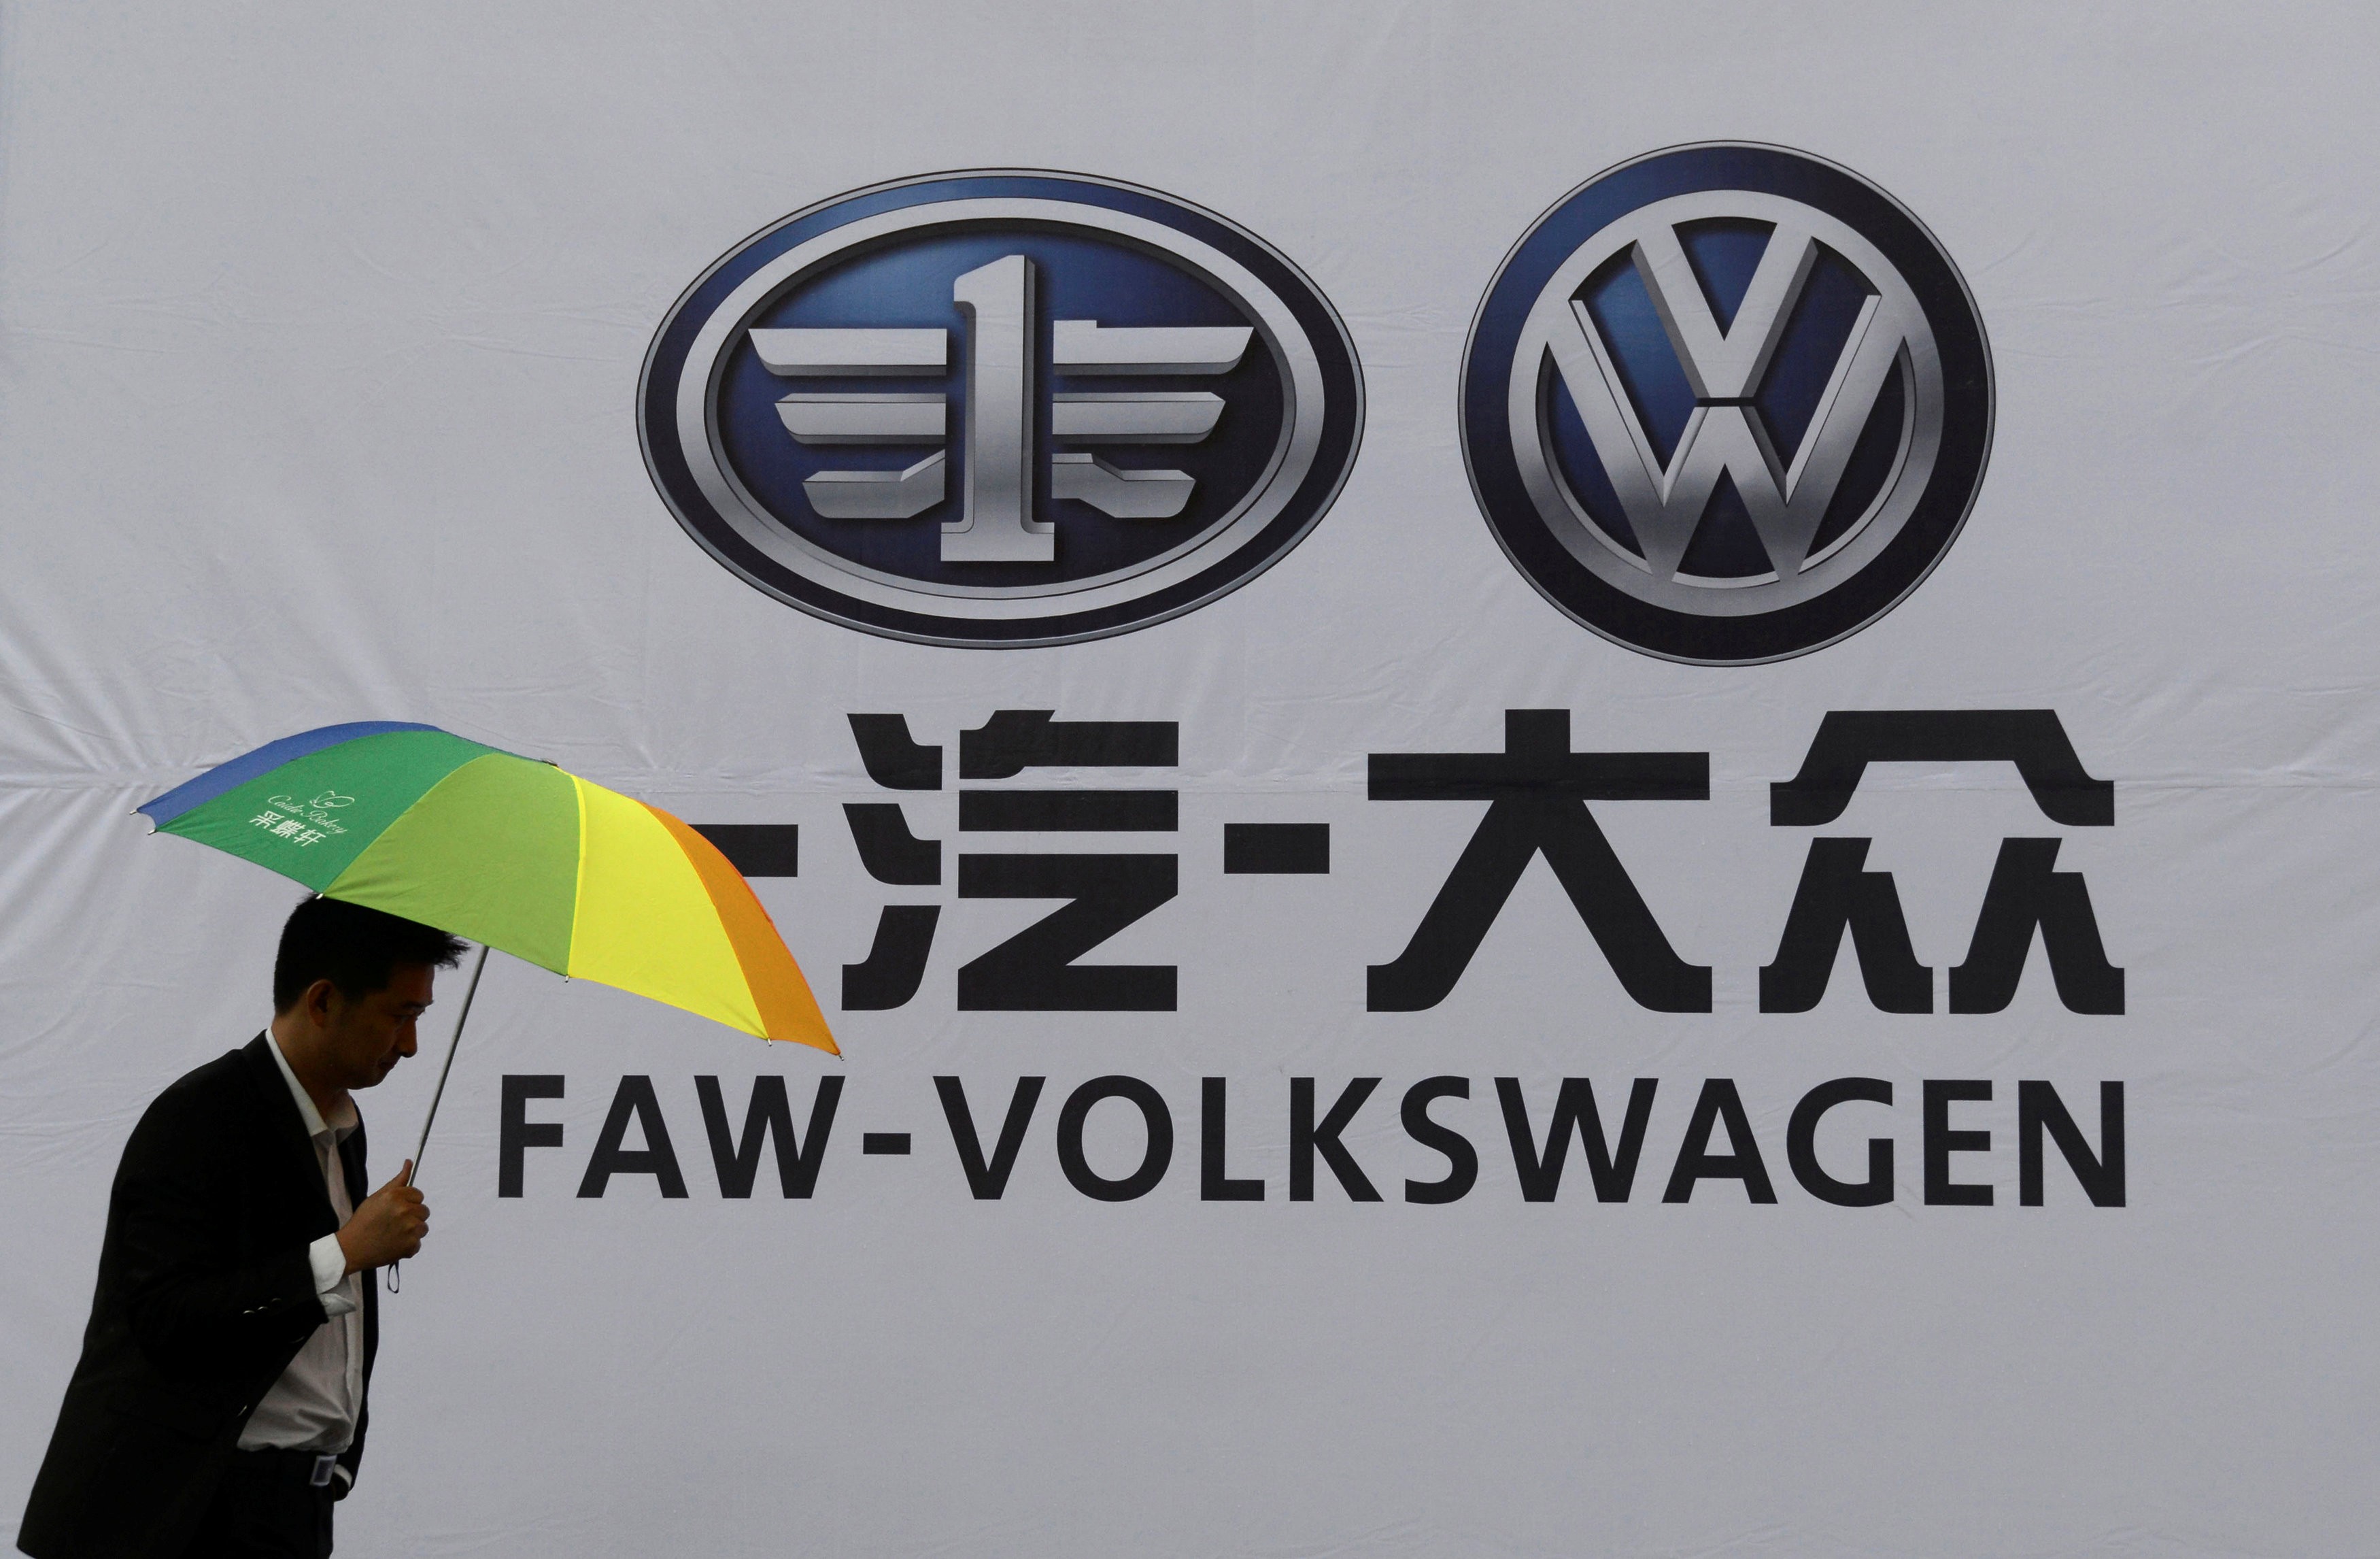 A company logo of FAW-Volkswagen at an automobile exhibition in Fuyang, Anhui province. Photo: Reuters